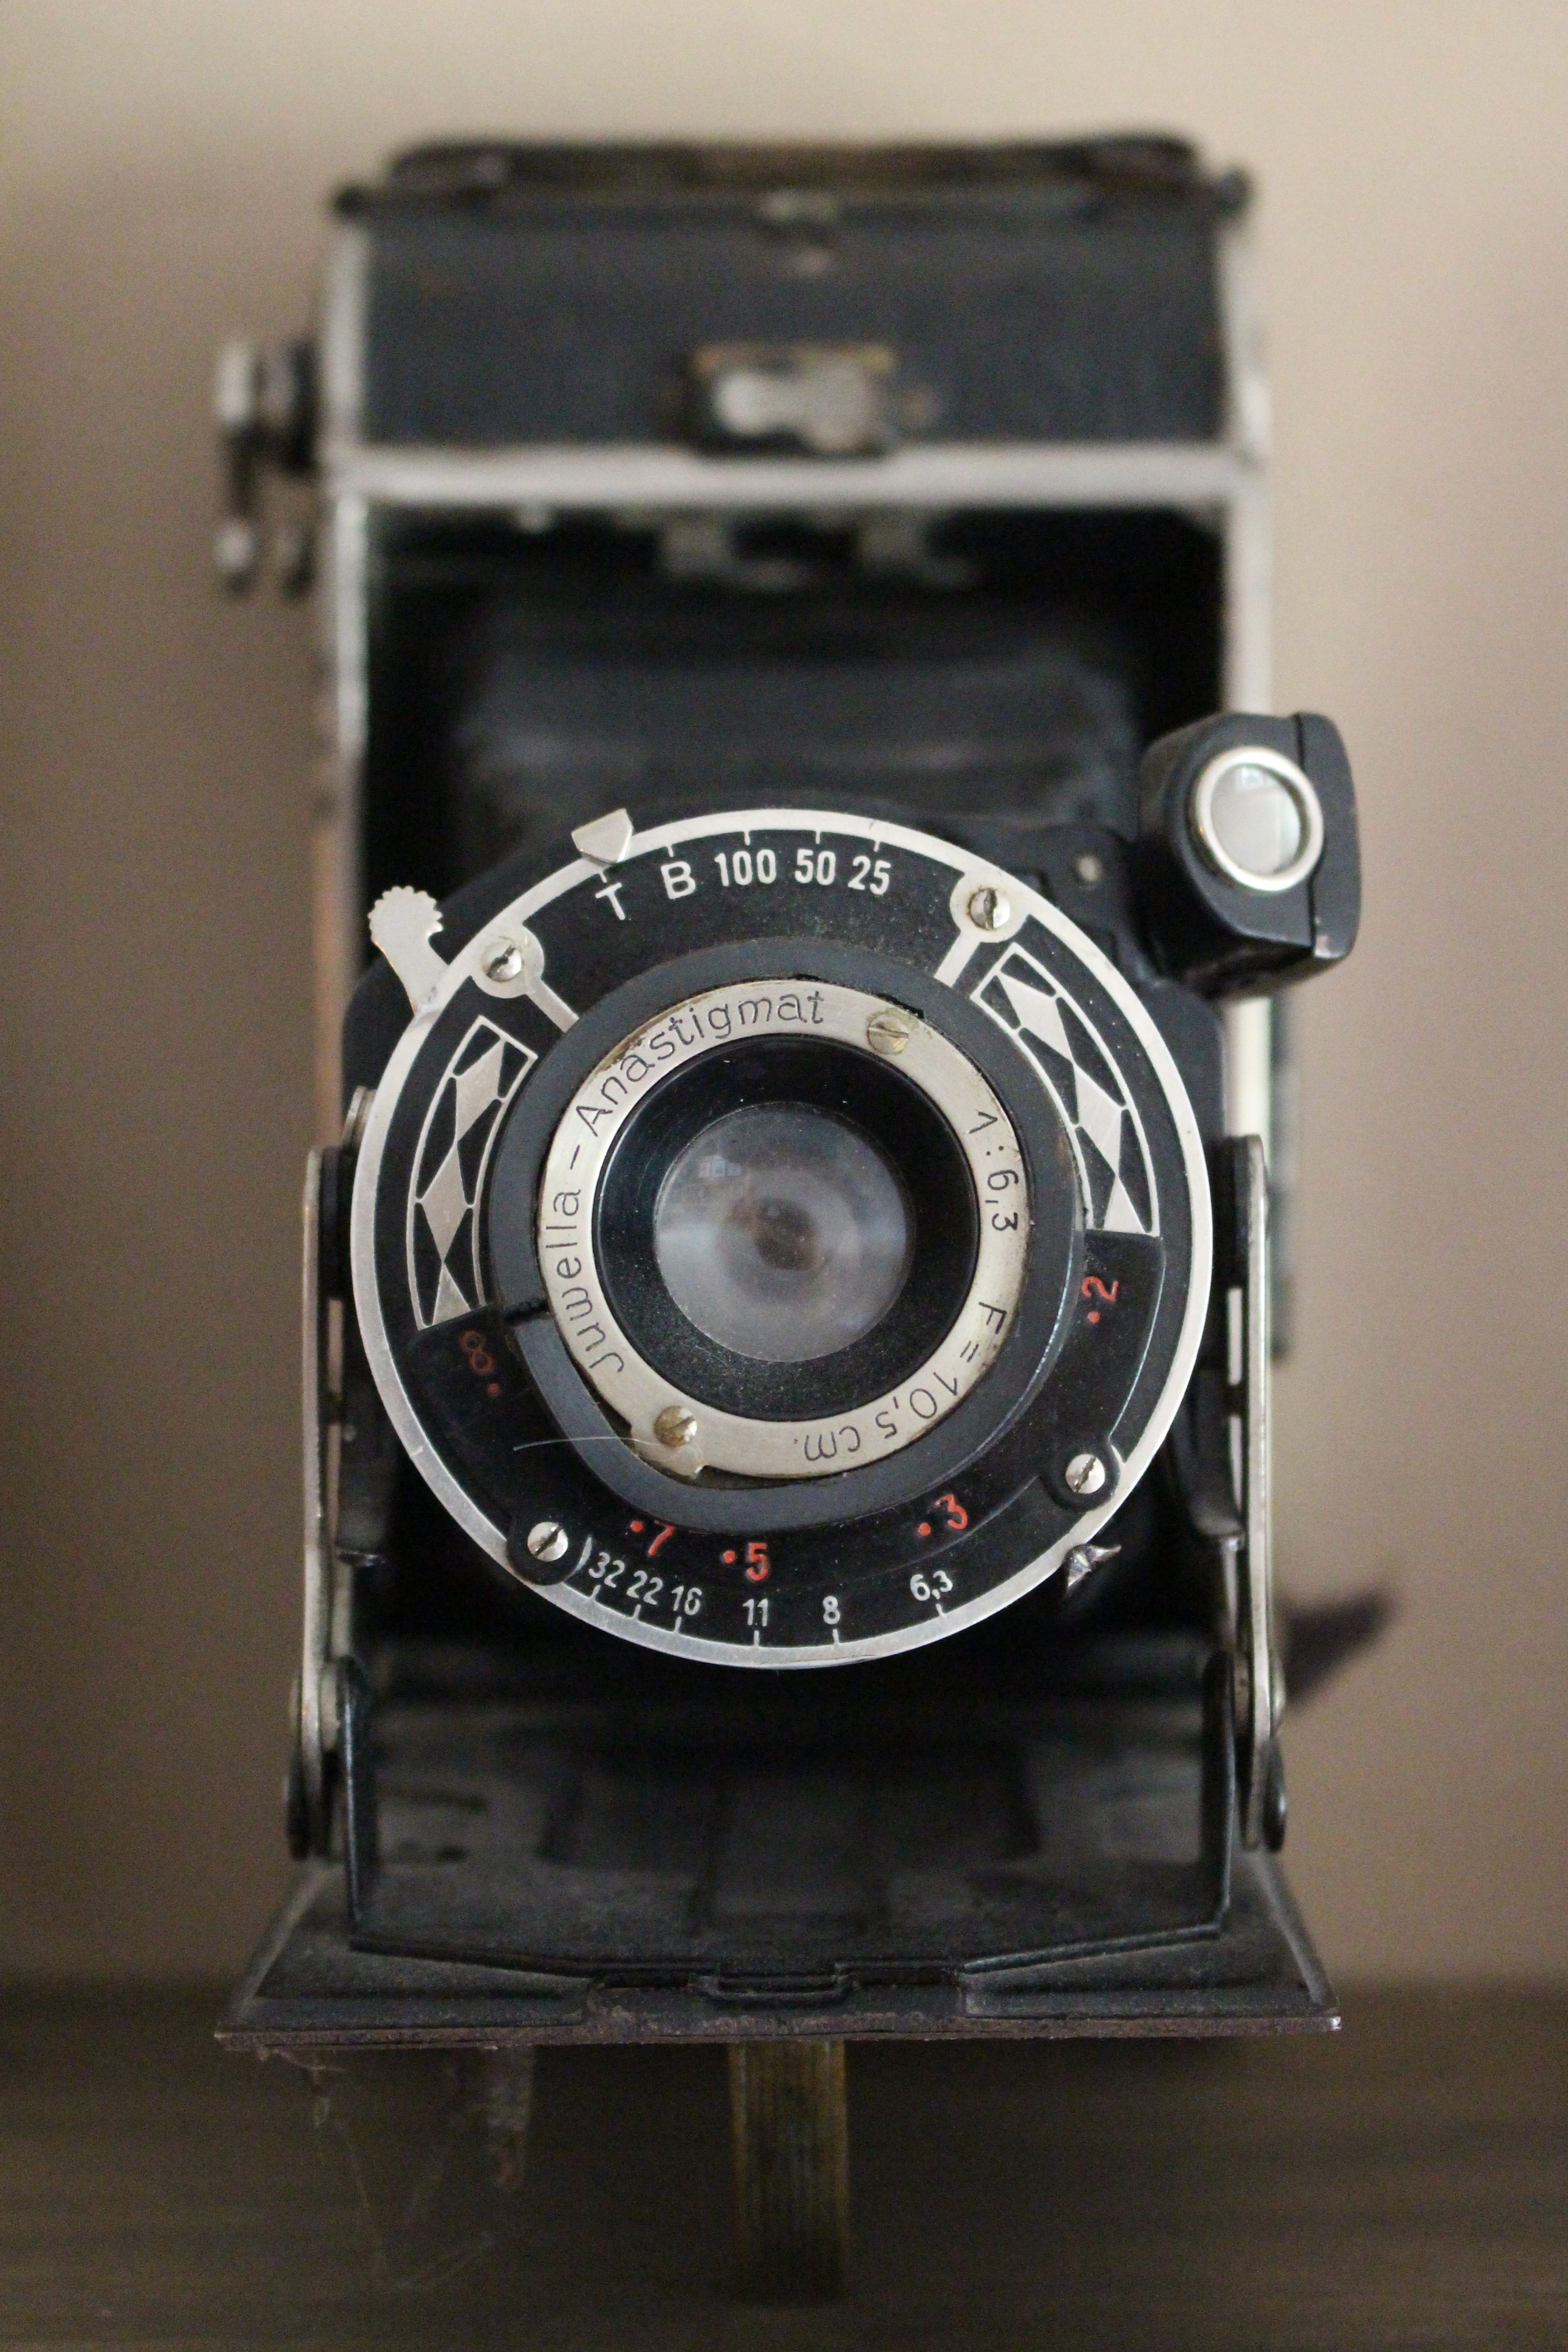 Vintage camera collection | decor | vintage collection | displaying collectibles | old cameras